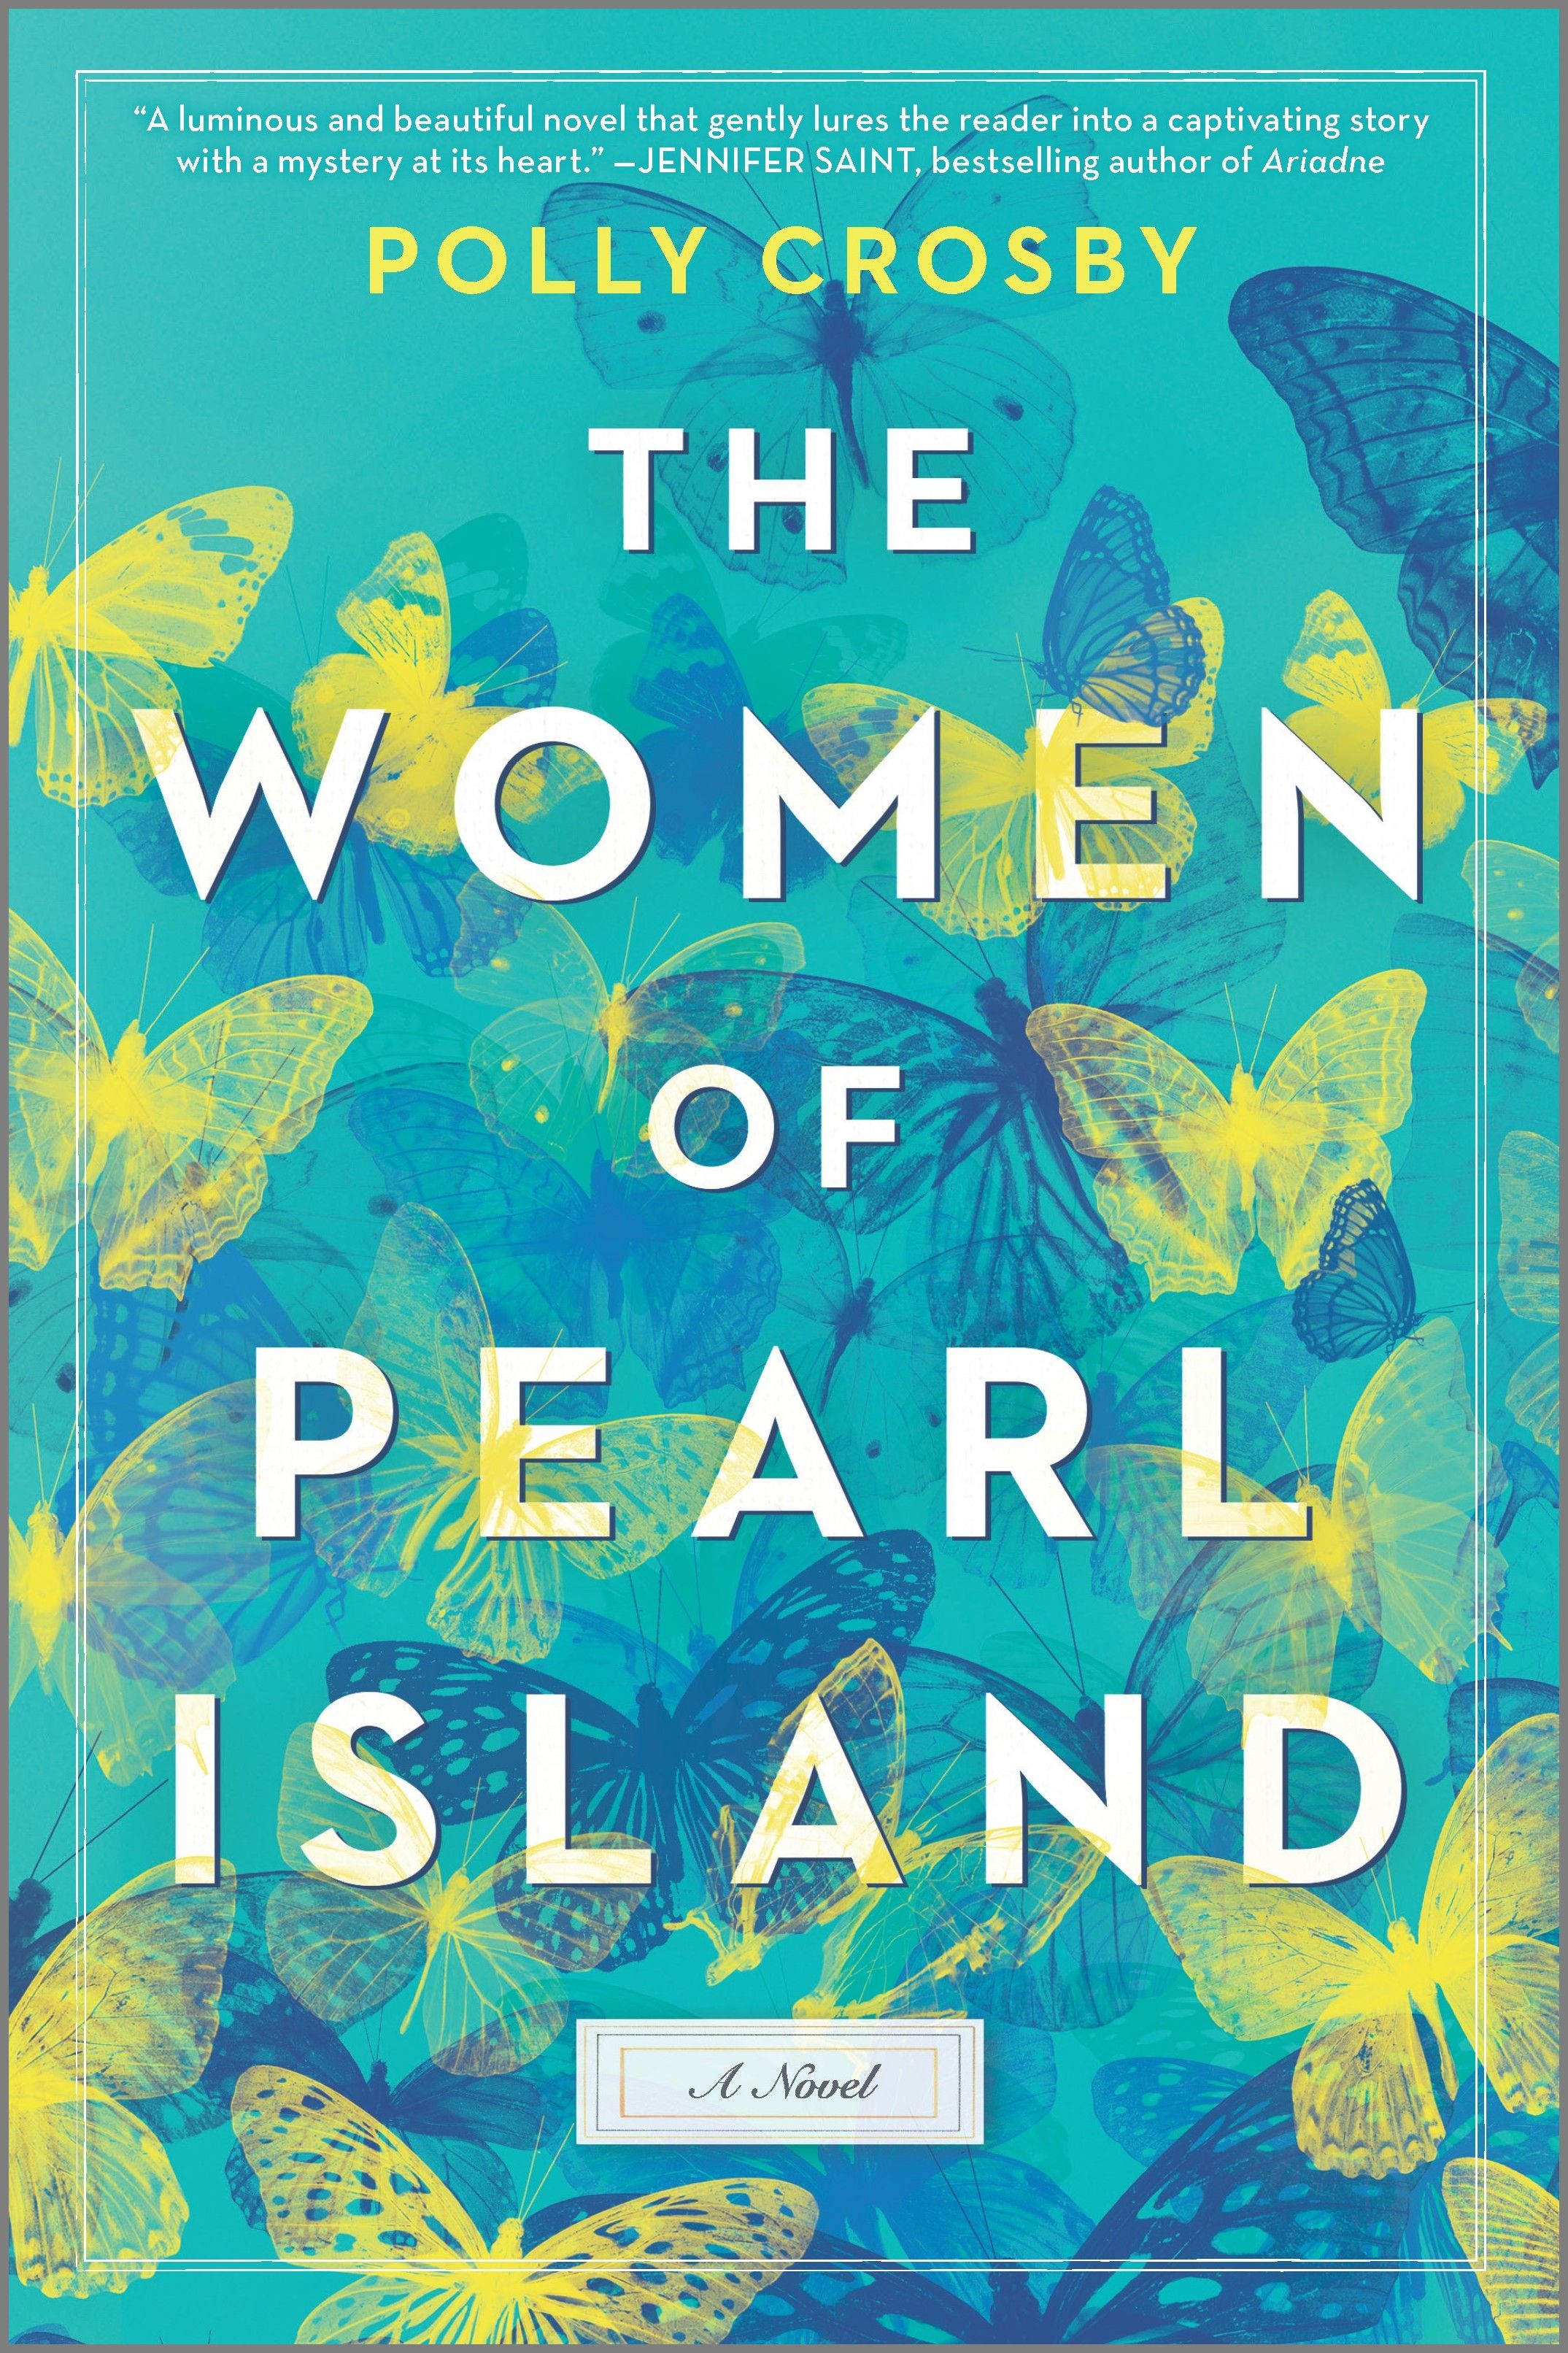 The Women of Pearl Island by Polly Crosby